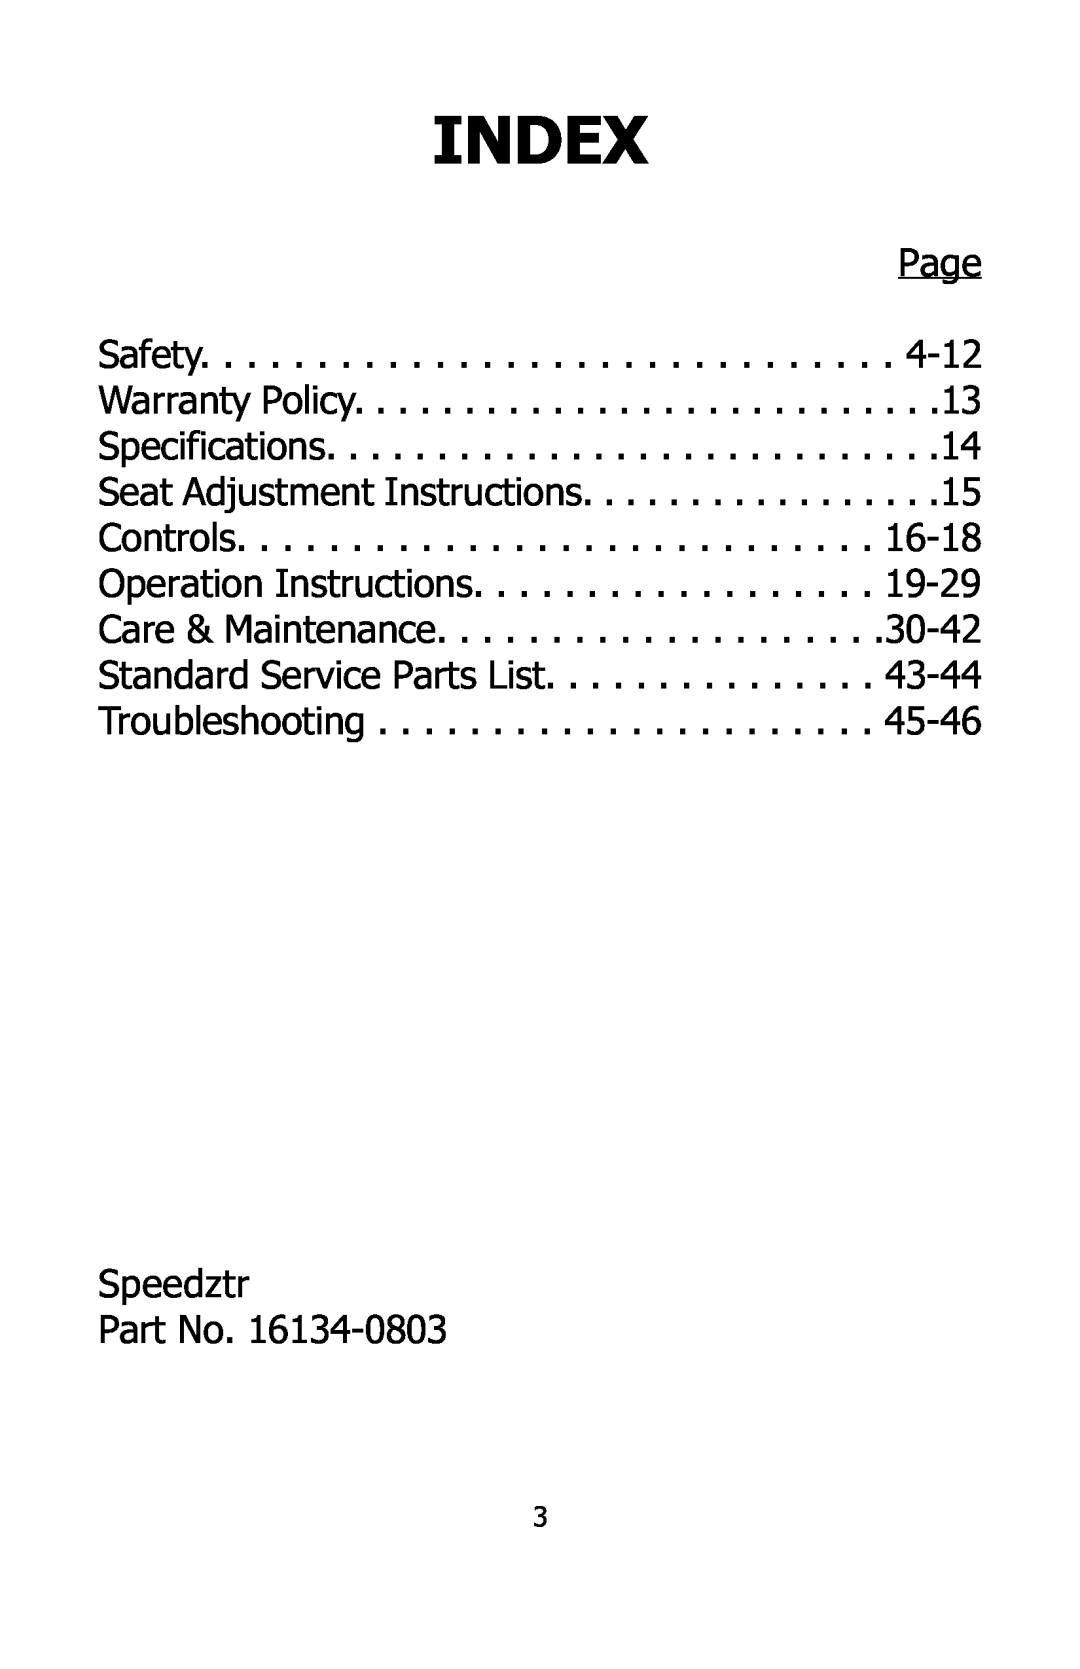 Dixon 16134-0803 manual Index, Page Safety Warranty Policy Specifications, Speedztr 